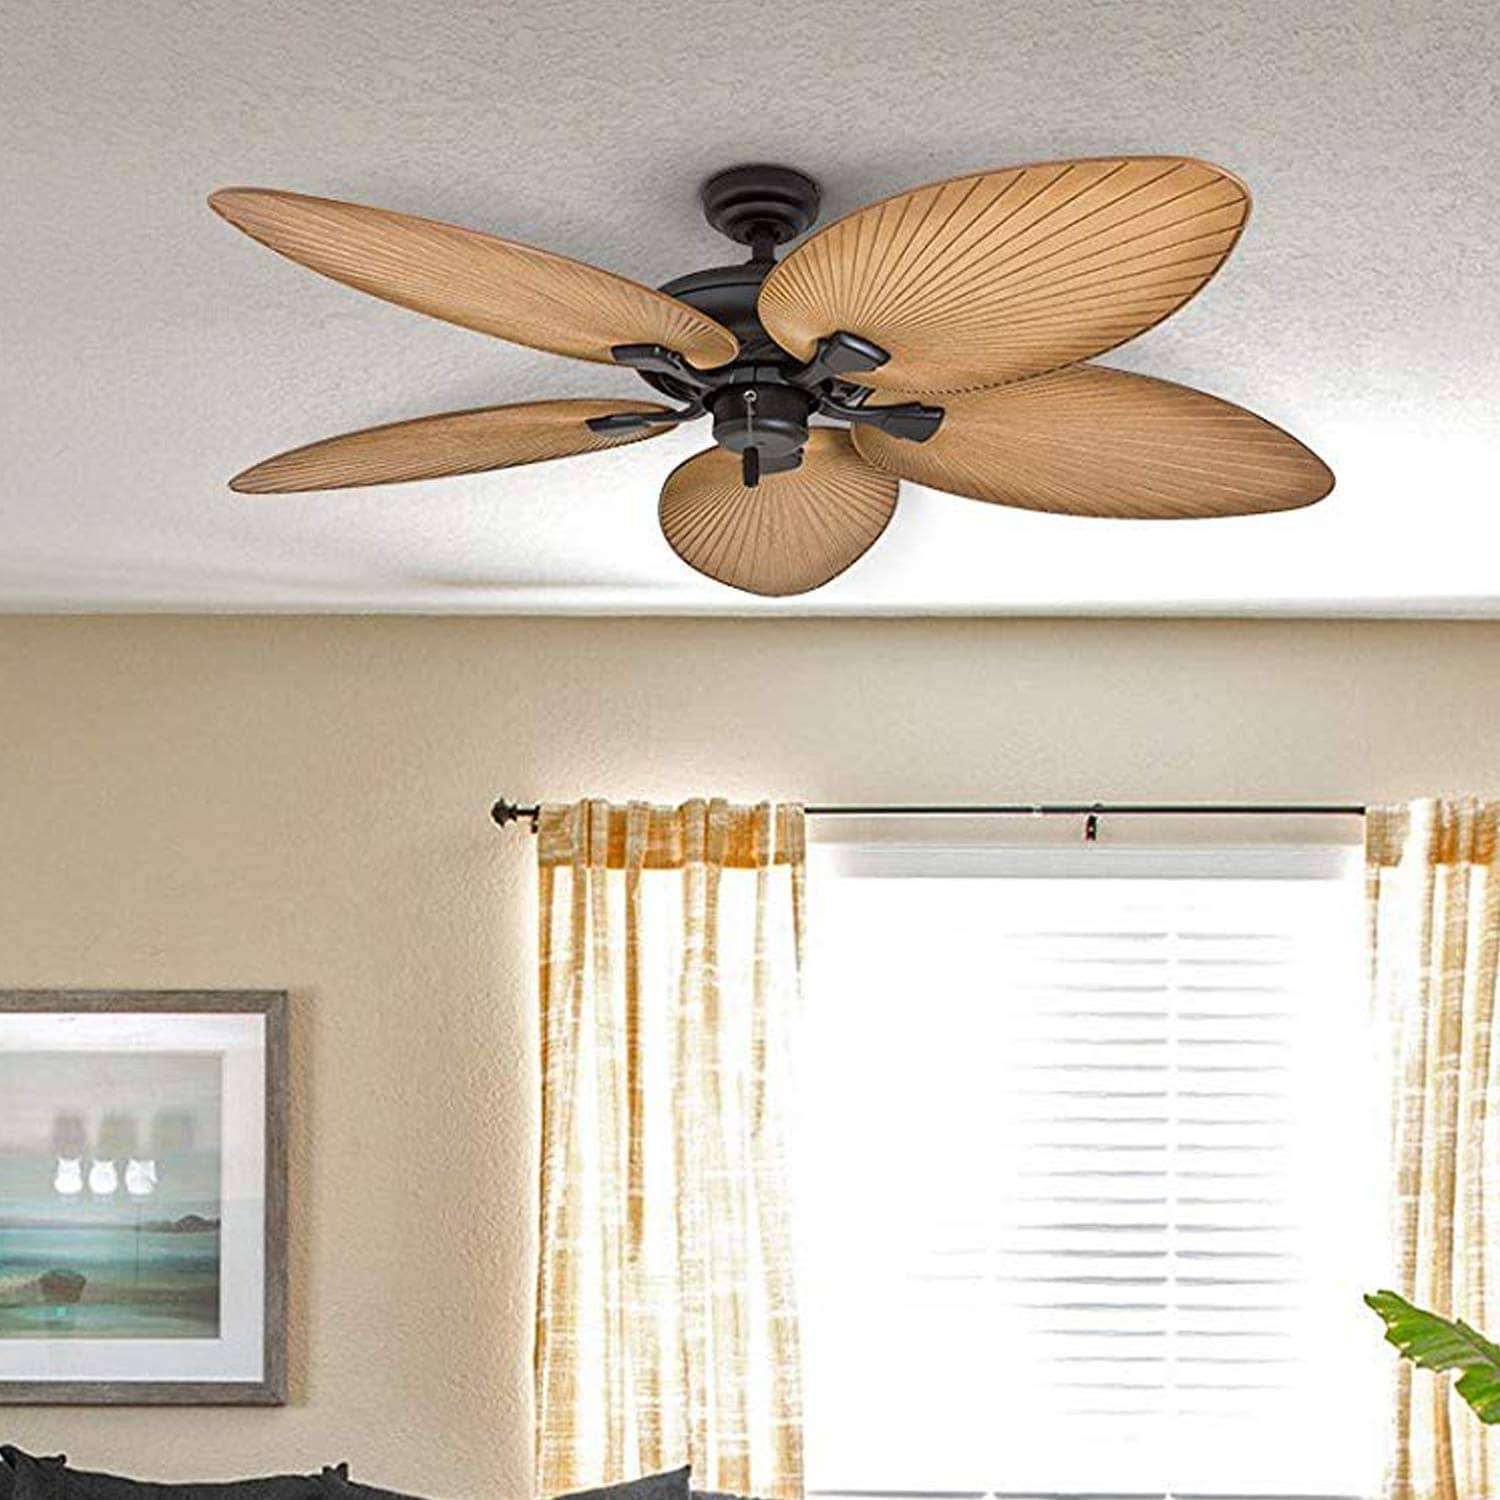 https://ak1.ostkcdn.com/images/products/is/images/direct/36bad599d281561939ac19170d65a79fdc590eb4/Honeywell-Palm-Valley-Bronze-Tropical-Ceiling-Fan-with-Palm-Leaf-Blades---52-inch.jpg